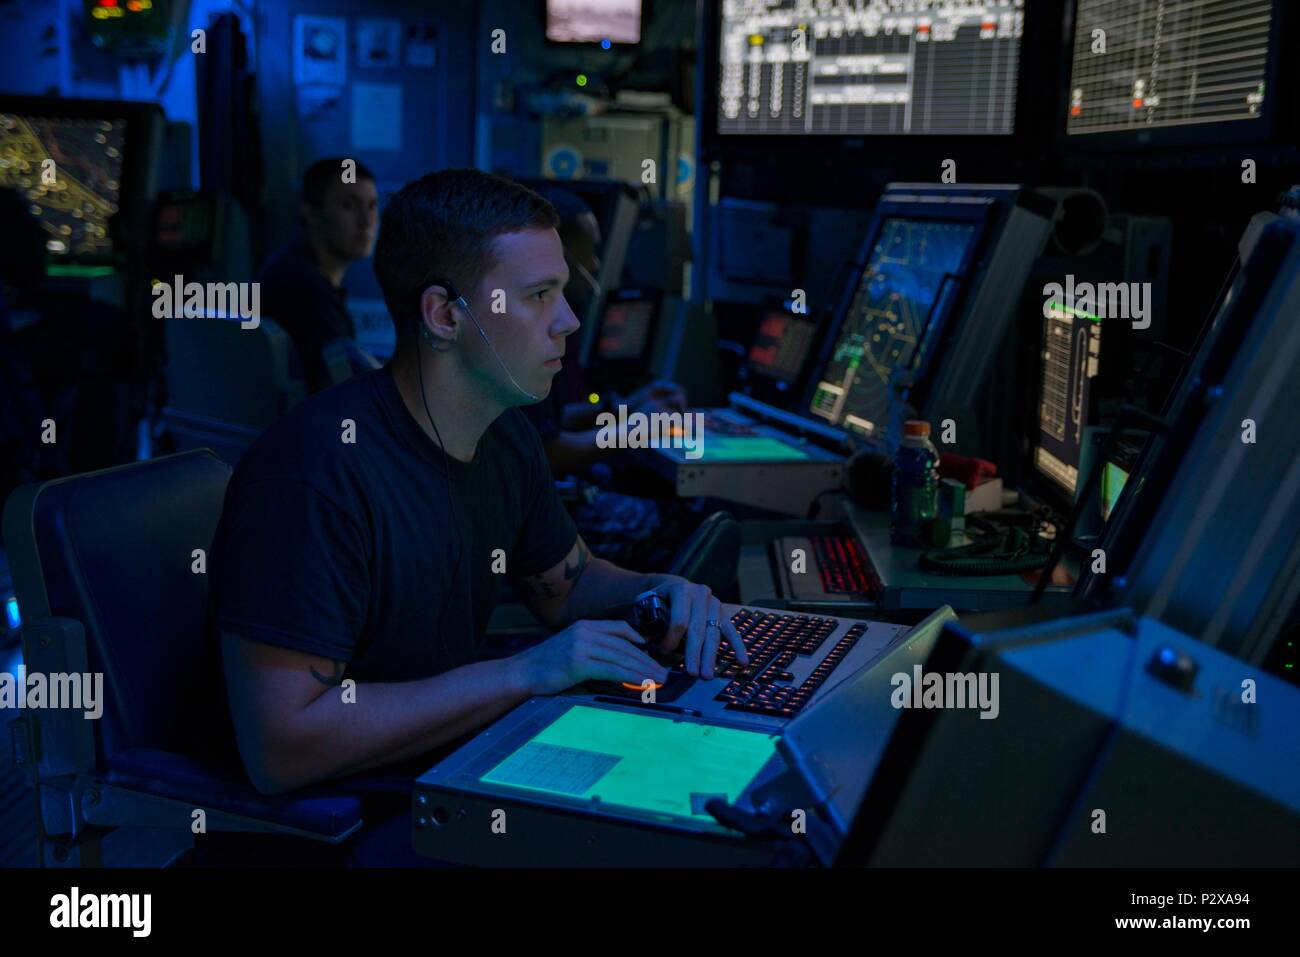 160807-N-WC455-004    ARABIAN GULF (Aug. 7, 2016) Air Traffic Controller 2nd Class Branden Culp-Henise, from York, Pa., controls the final approach and sequencing for aircraft recovery in the carrier air traffic control center (CATCC) of the aircraft carrier USS Dwight D. Eisenhower (CVN 69) (Ike). Ike and its Carrier Strike Group are deployed in support of Operation Inherent Resolve, maritime security operations and theater security cooperation efforts in the U.S. 5th Fleet area of operations. (U.S. Navy photo by Mass Communication Specialist Seaman Apprentice Joshua Murray/Released) Stock Photo